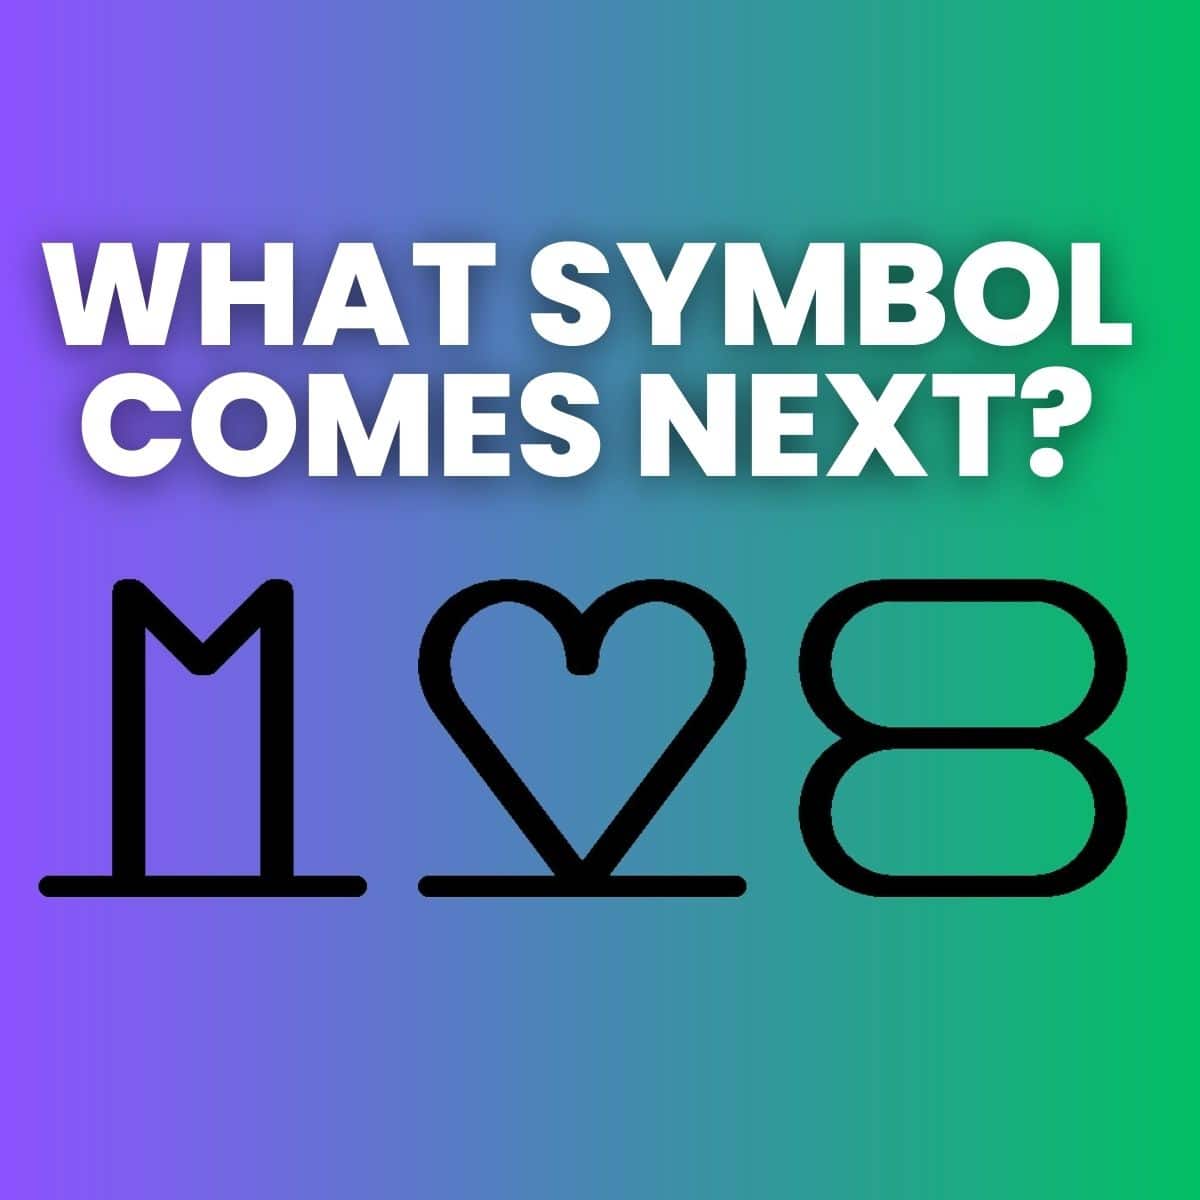 what symbol comes next in the m heart 8 puzzle?